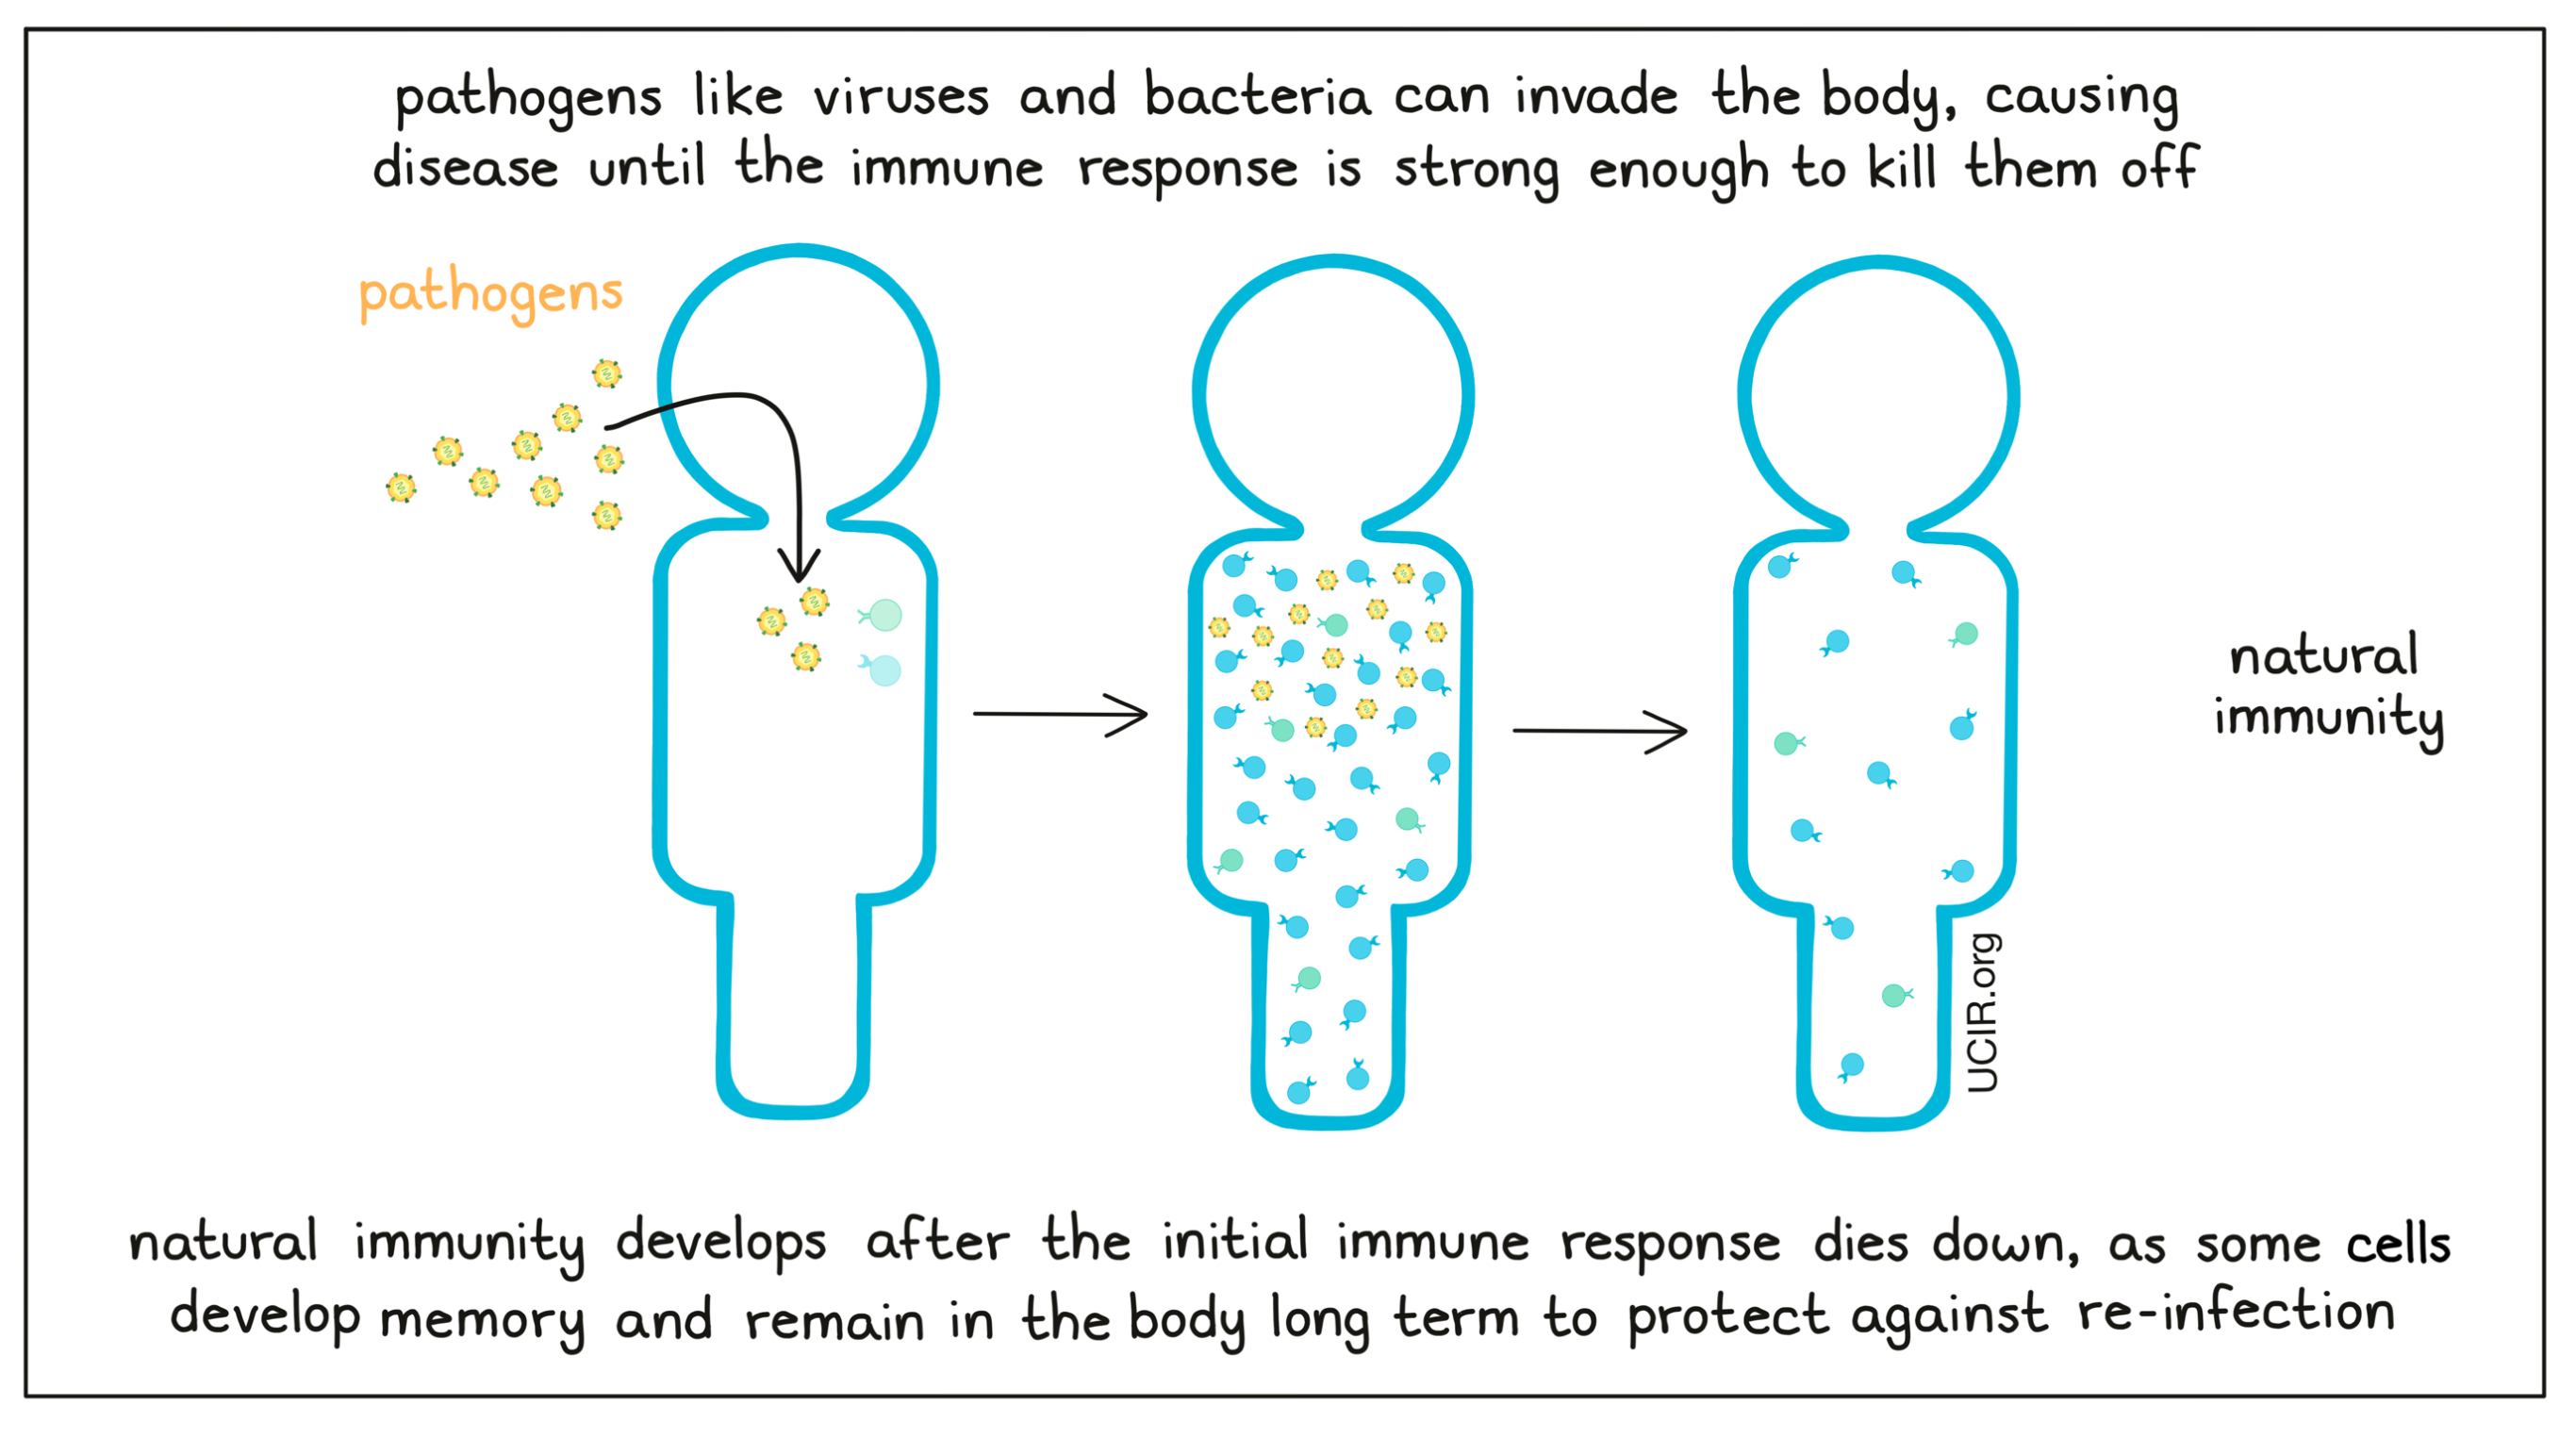 Illustration showing how pathogens like viruses and bacteria can invade the body